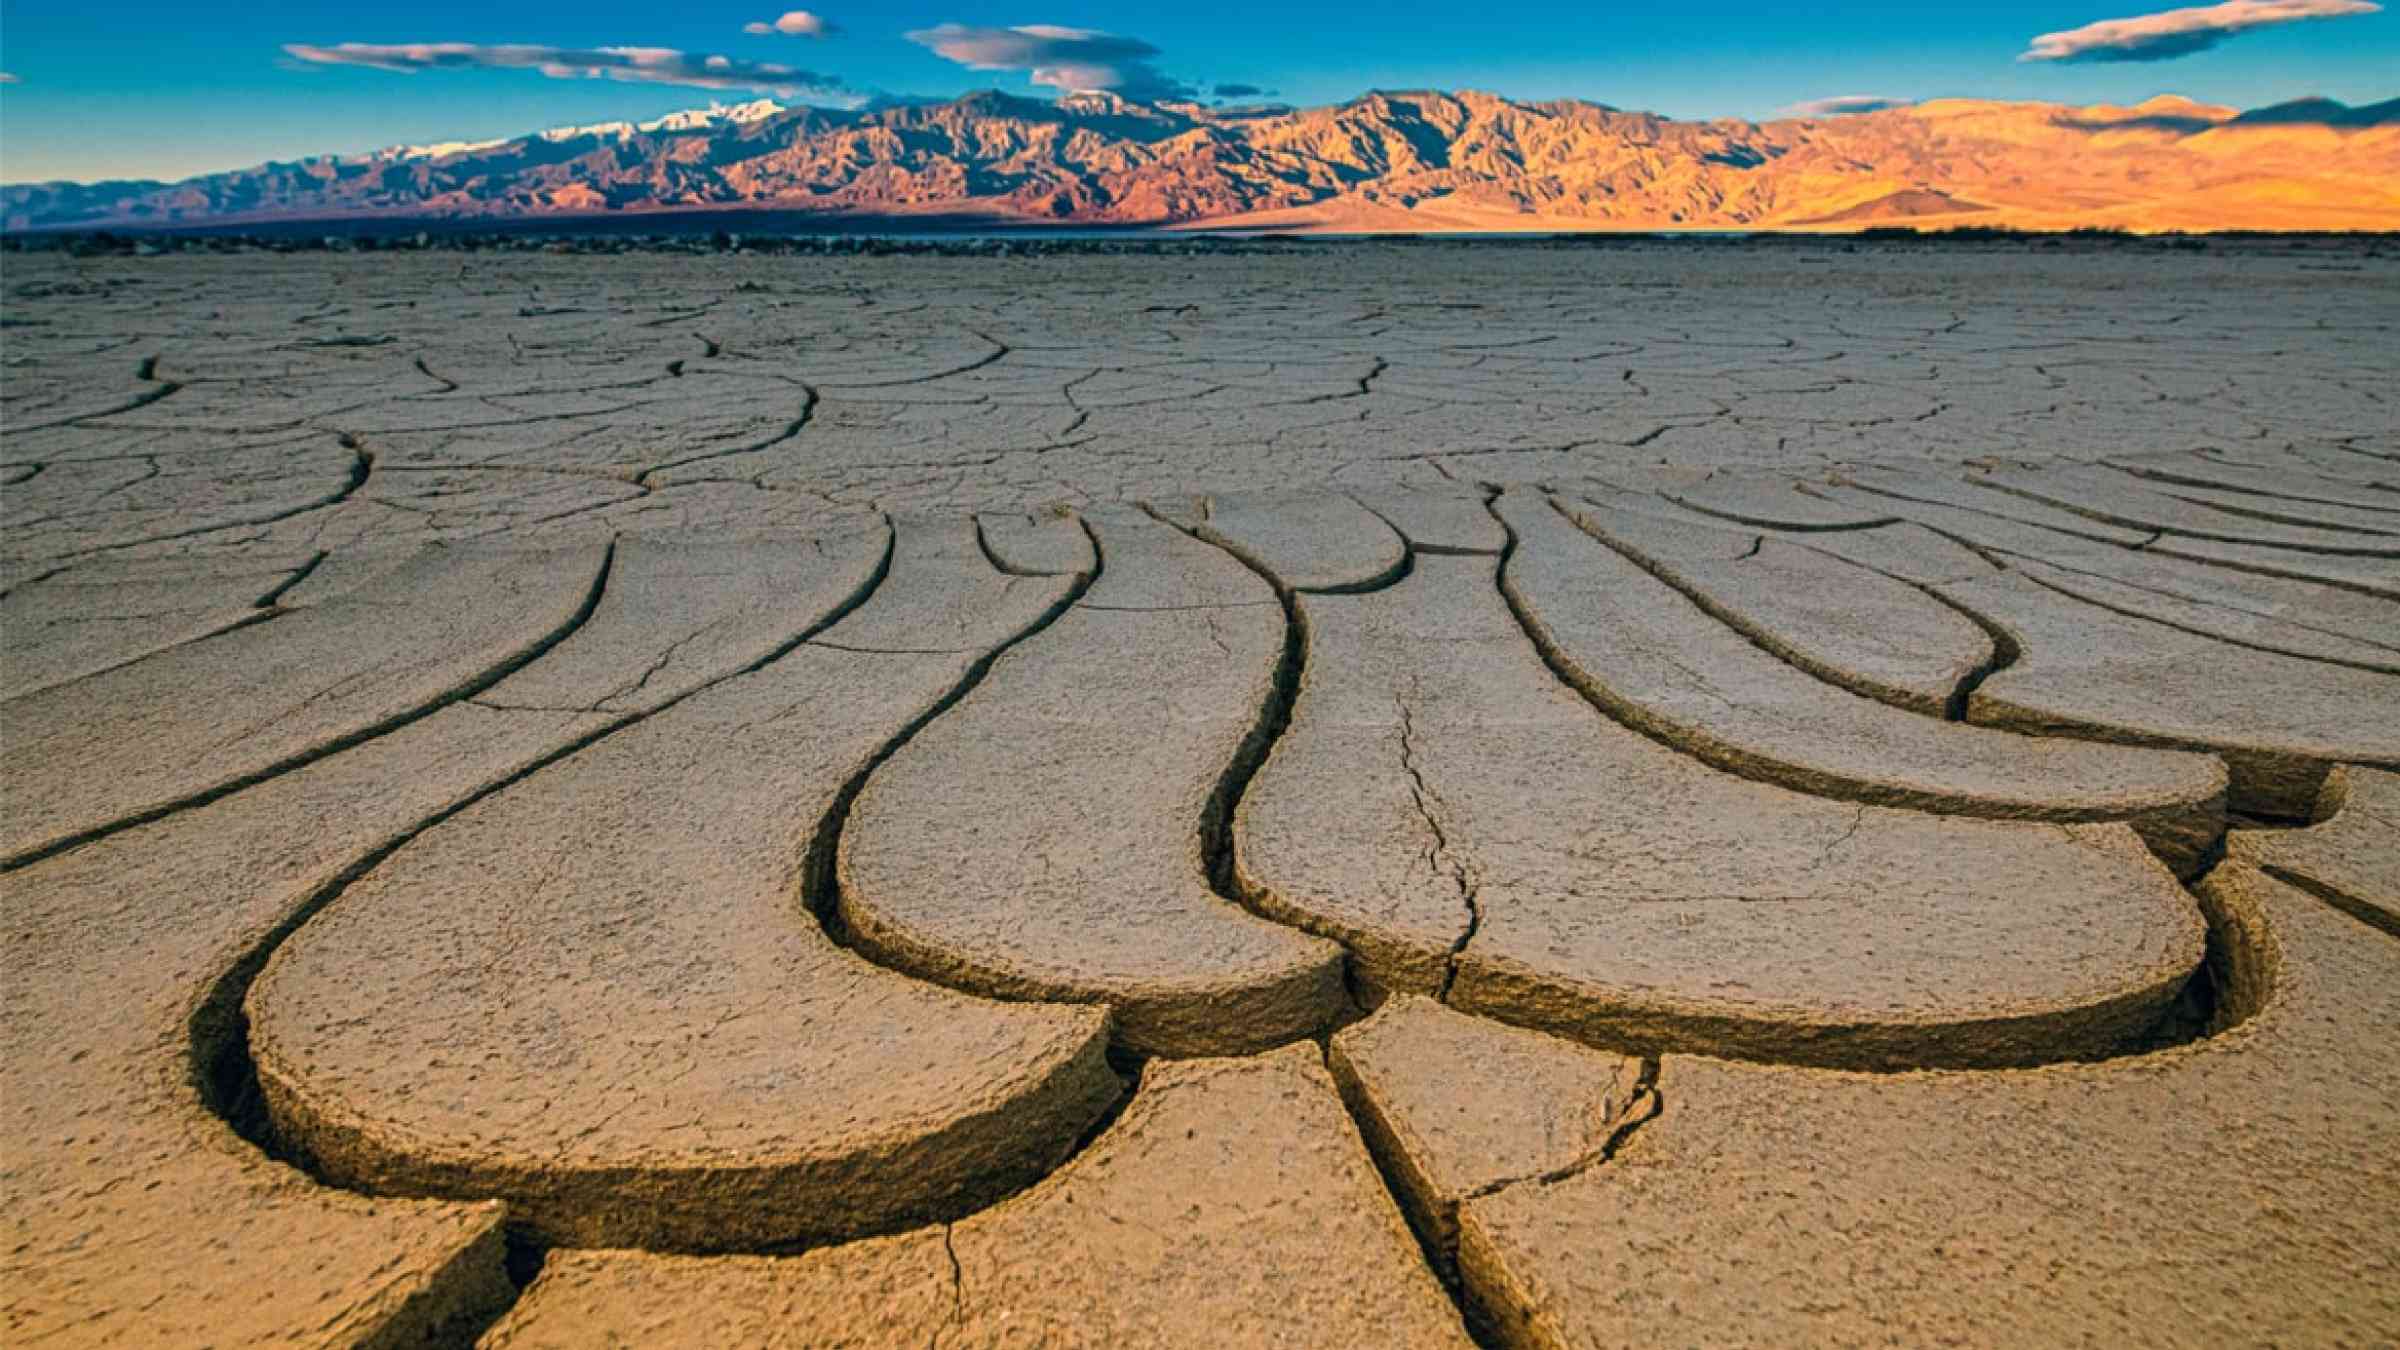 Cracked soil in the death valley, California, USA